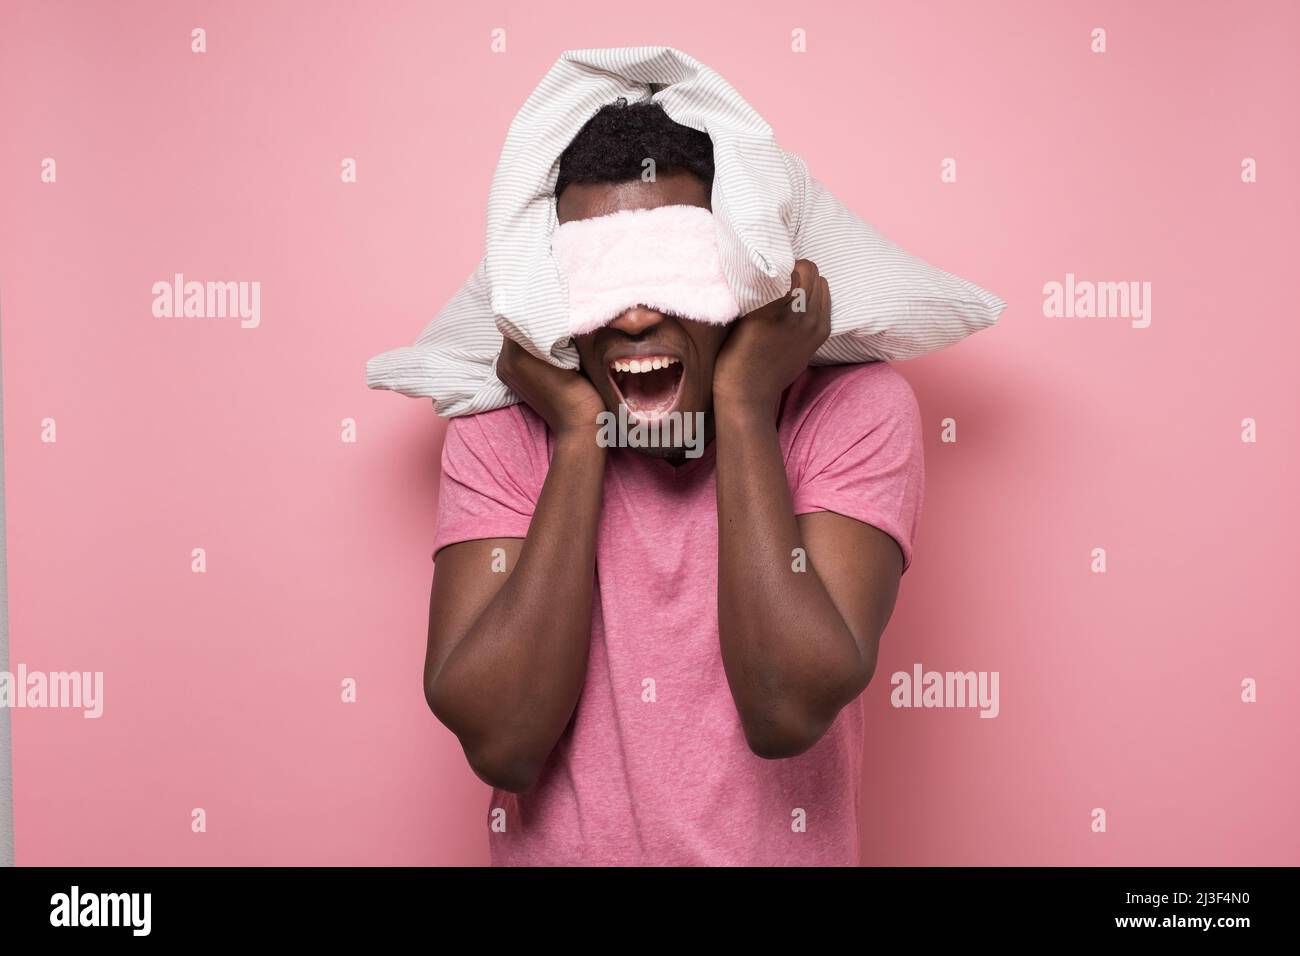 African man shouting with an angry expression and holding a pillow Stock Photo